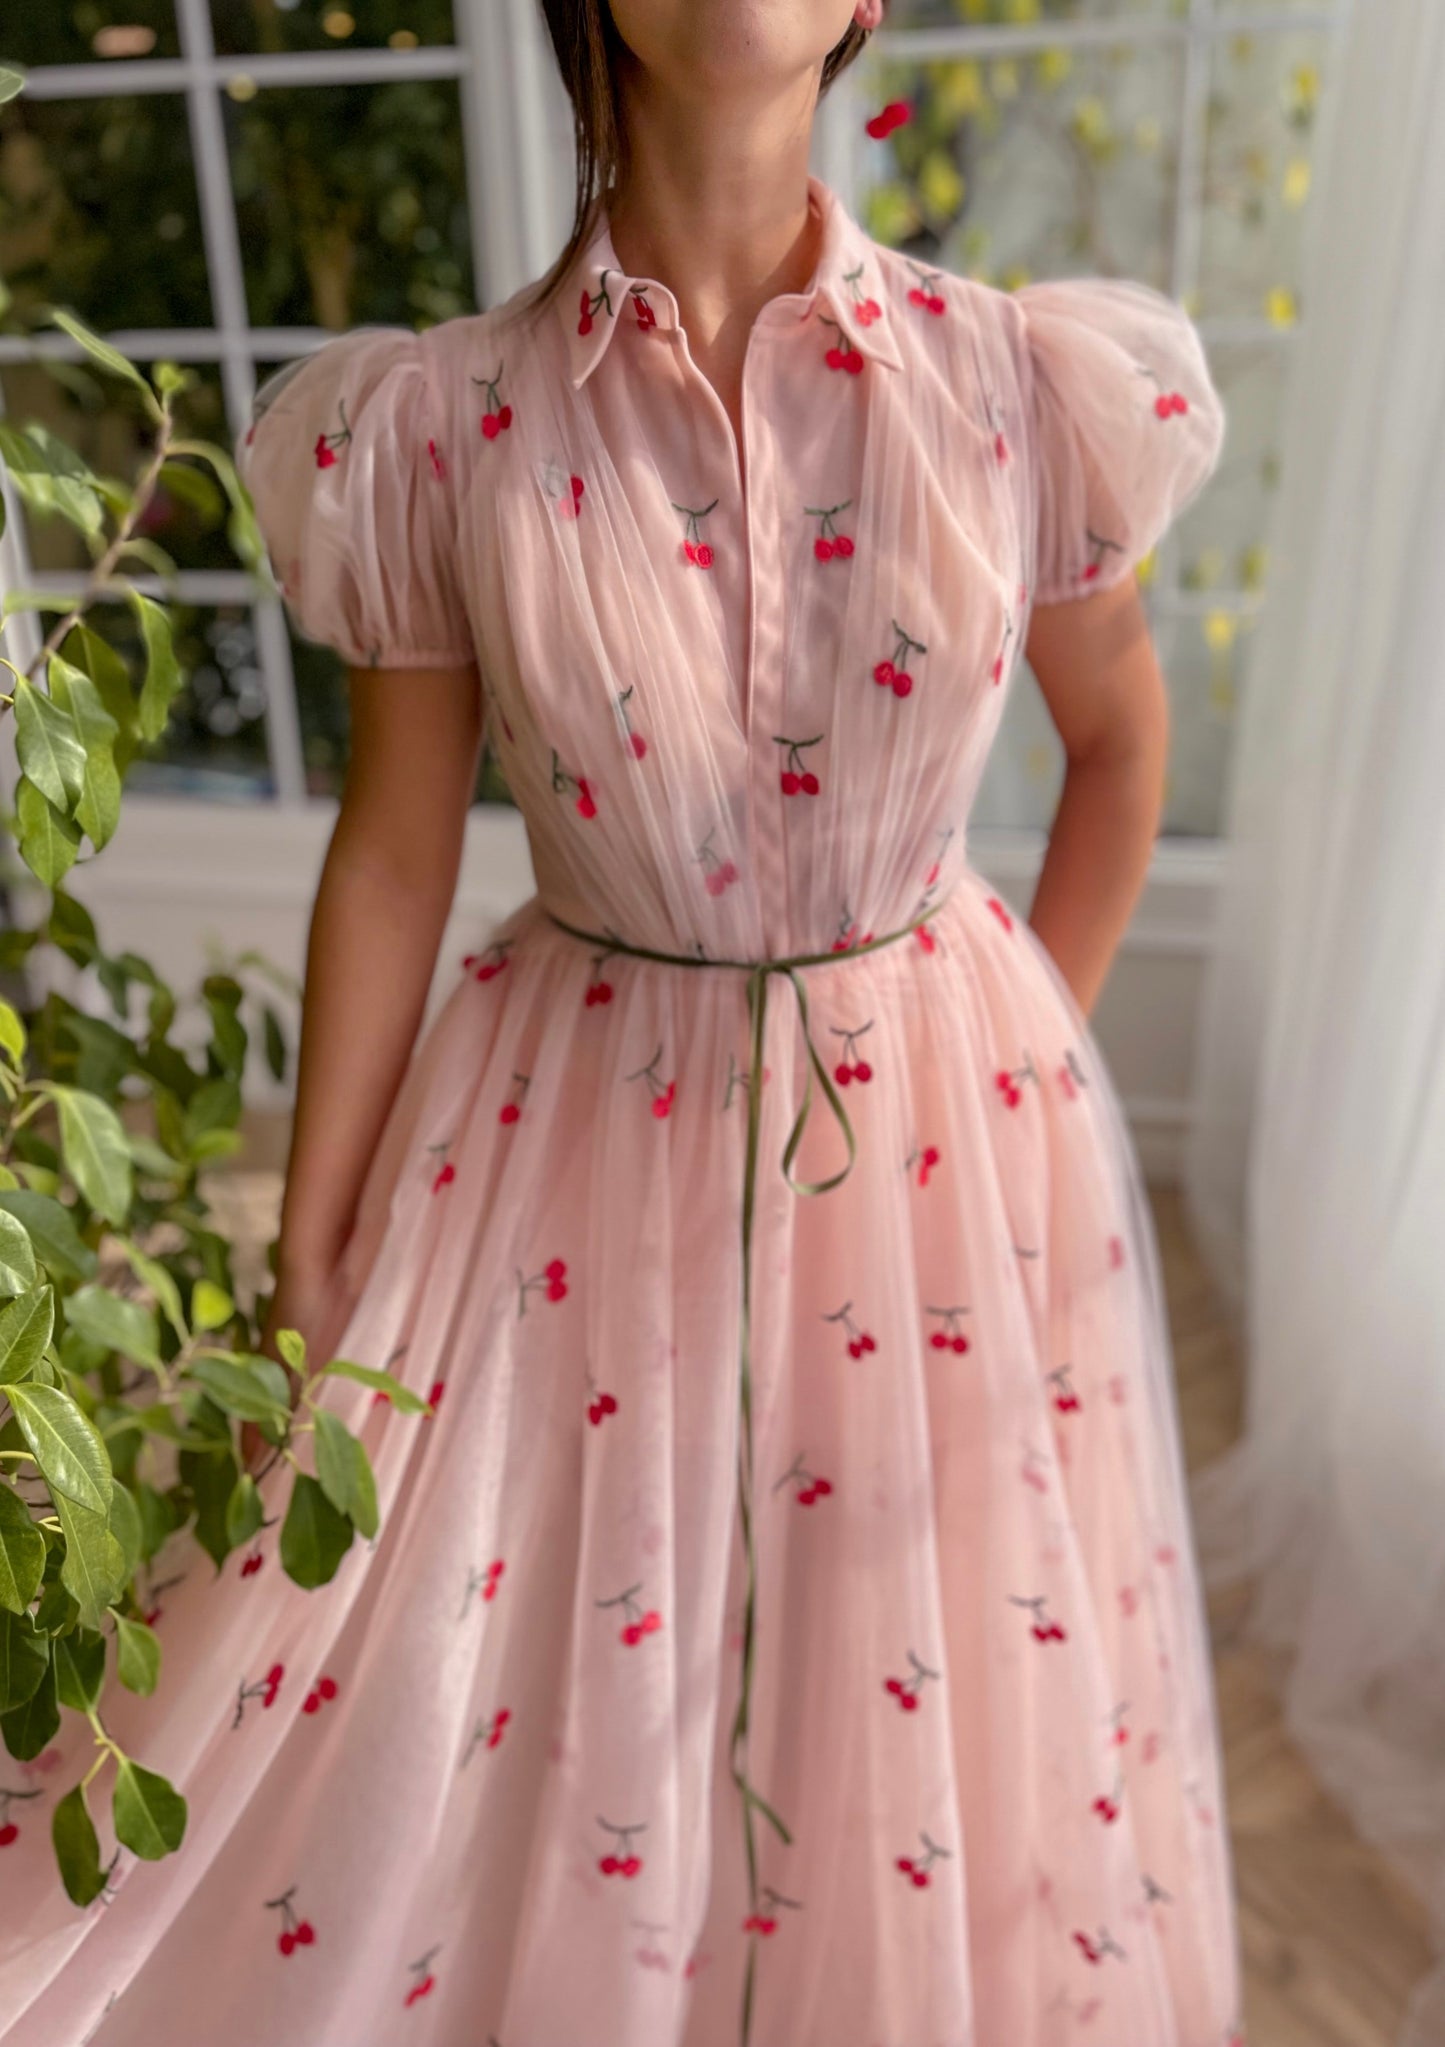 Pink A-Line dress with cherries, cap sleeves and collar top